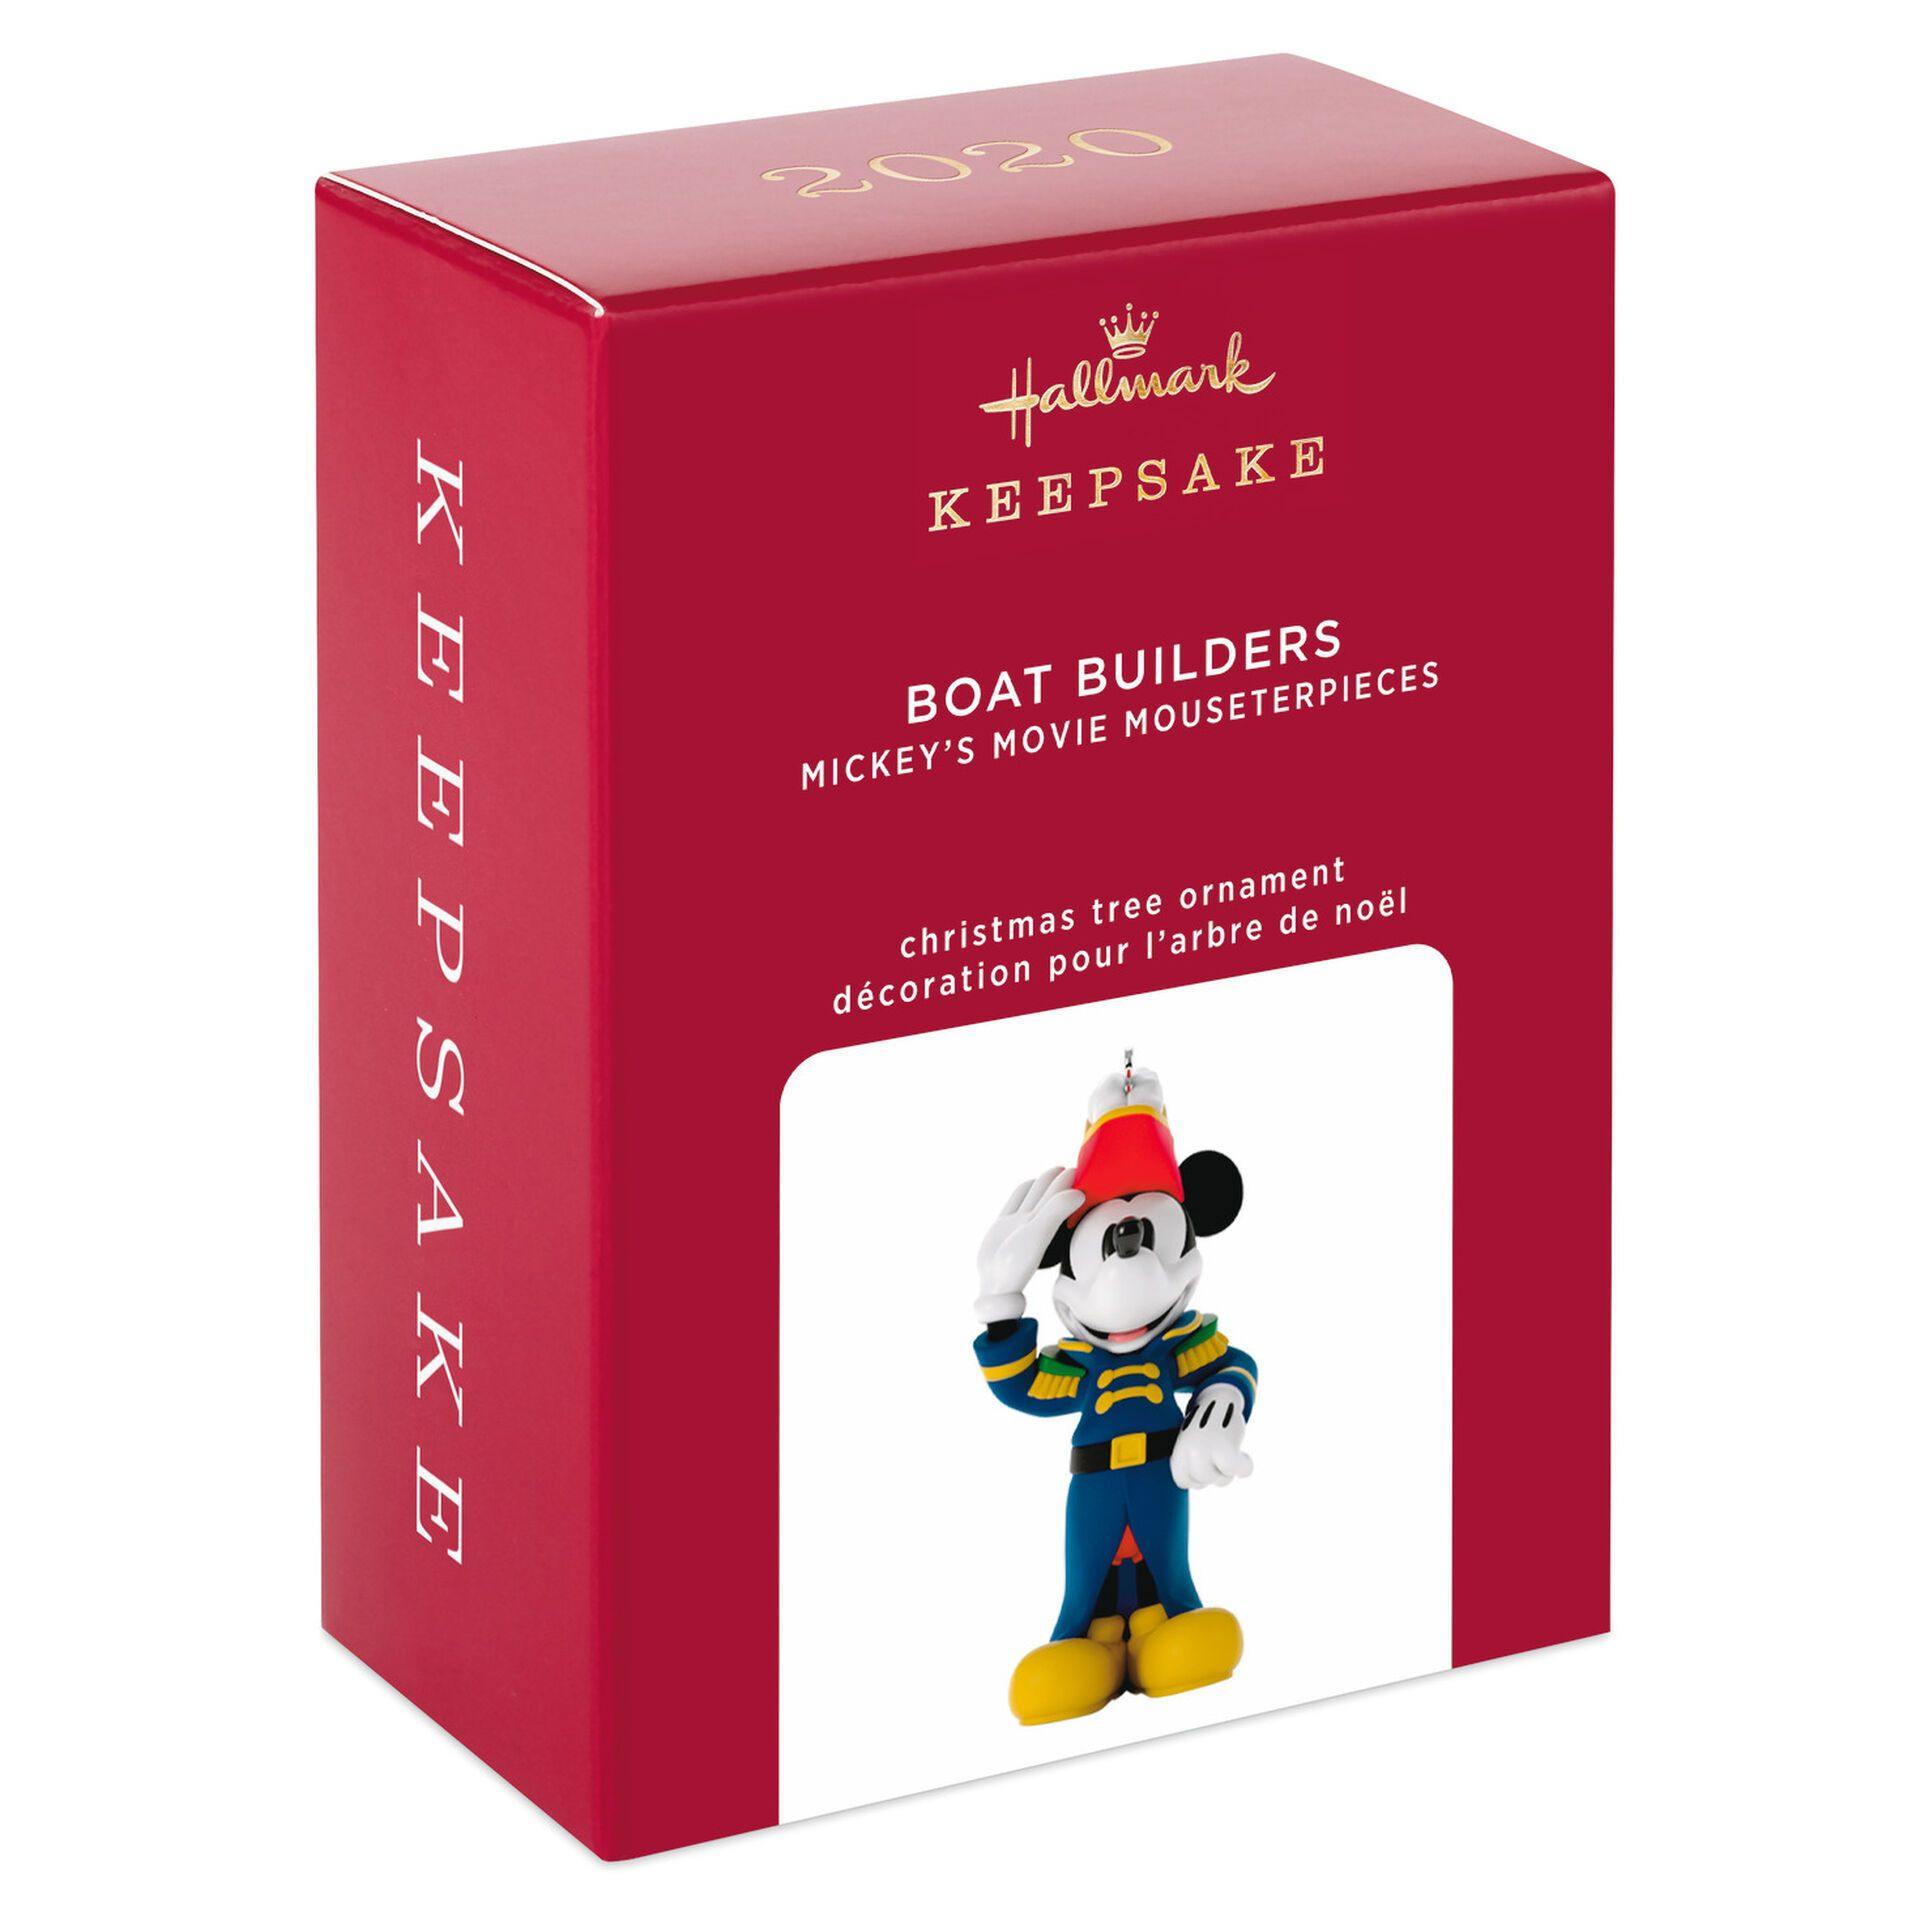 Disney Mickey'S Movie Mouseterpieces Boat Builders Ornament